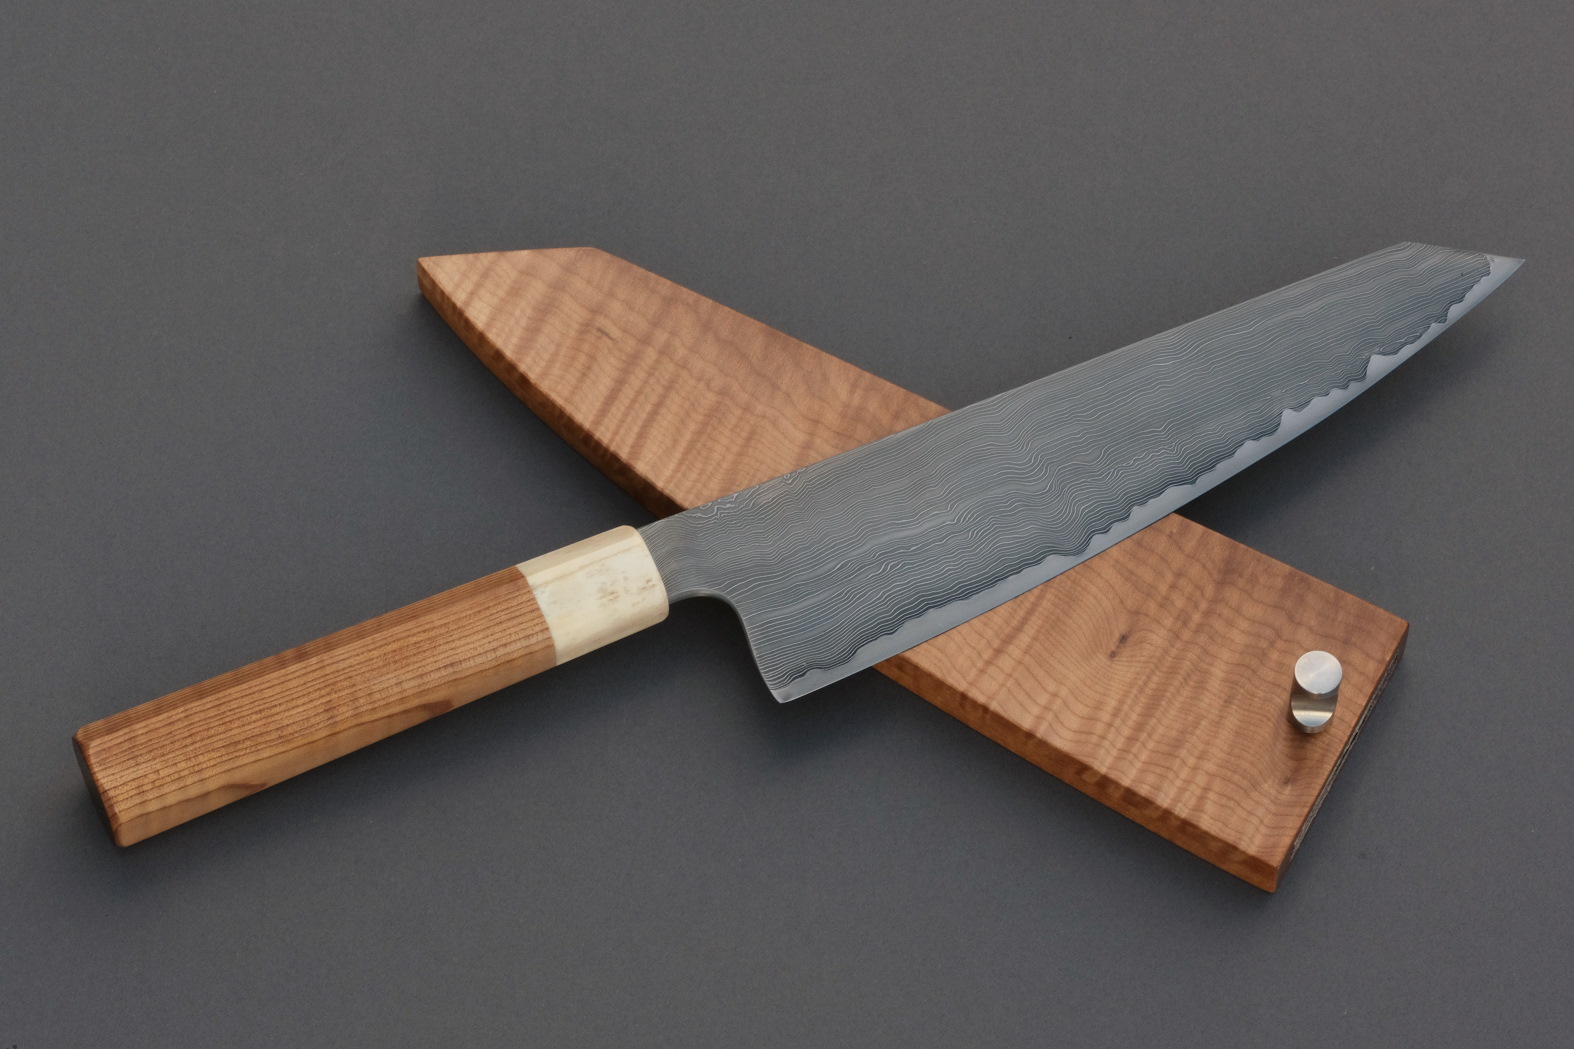 Nakama knife from Guldimann with a handle and sheath from Bijouwood flamed maple